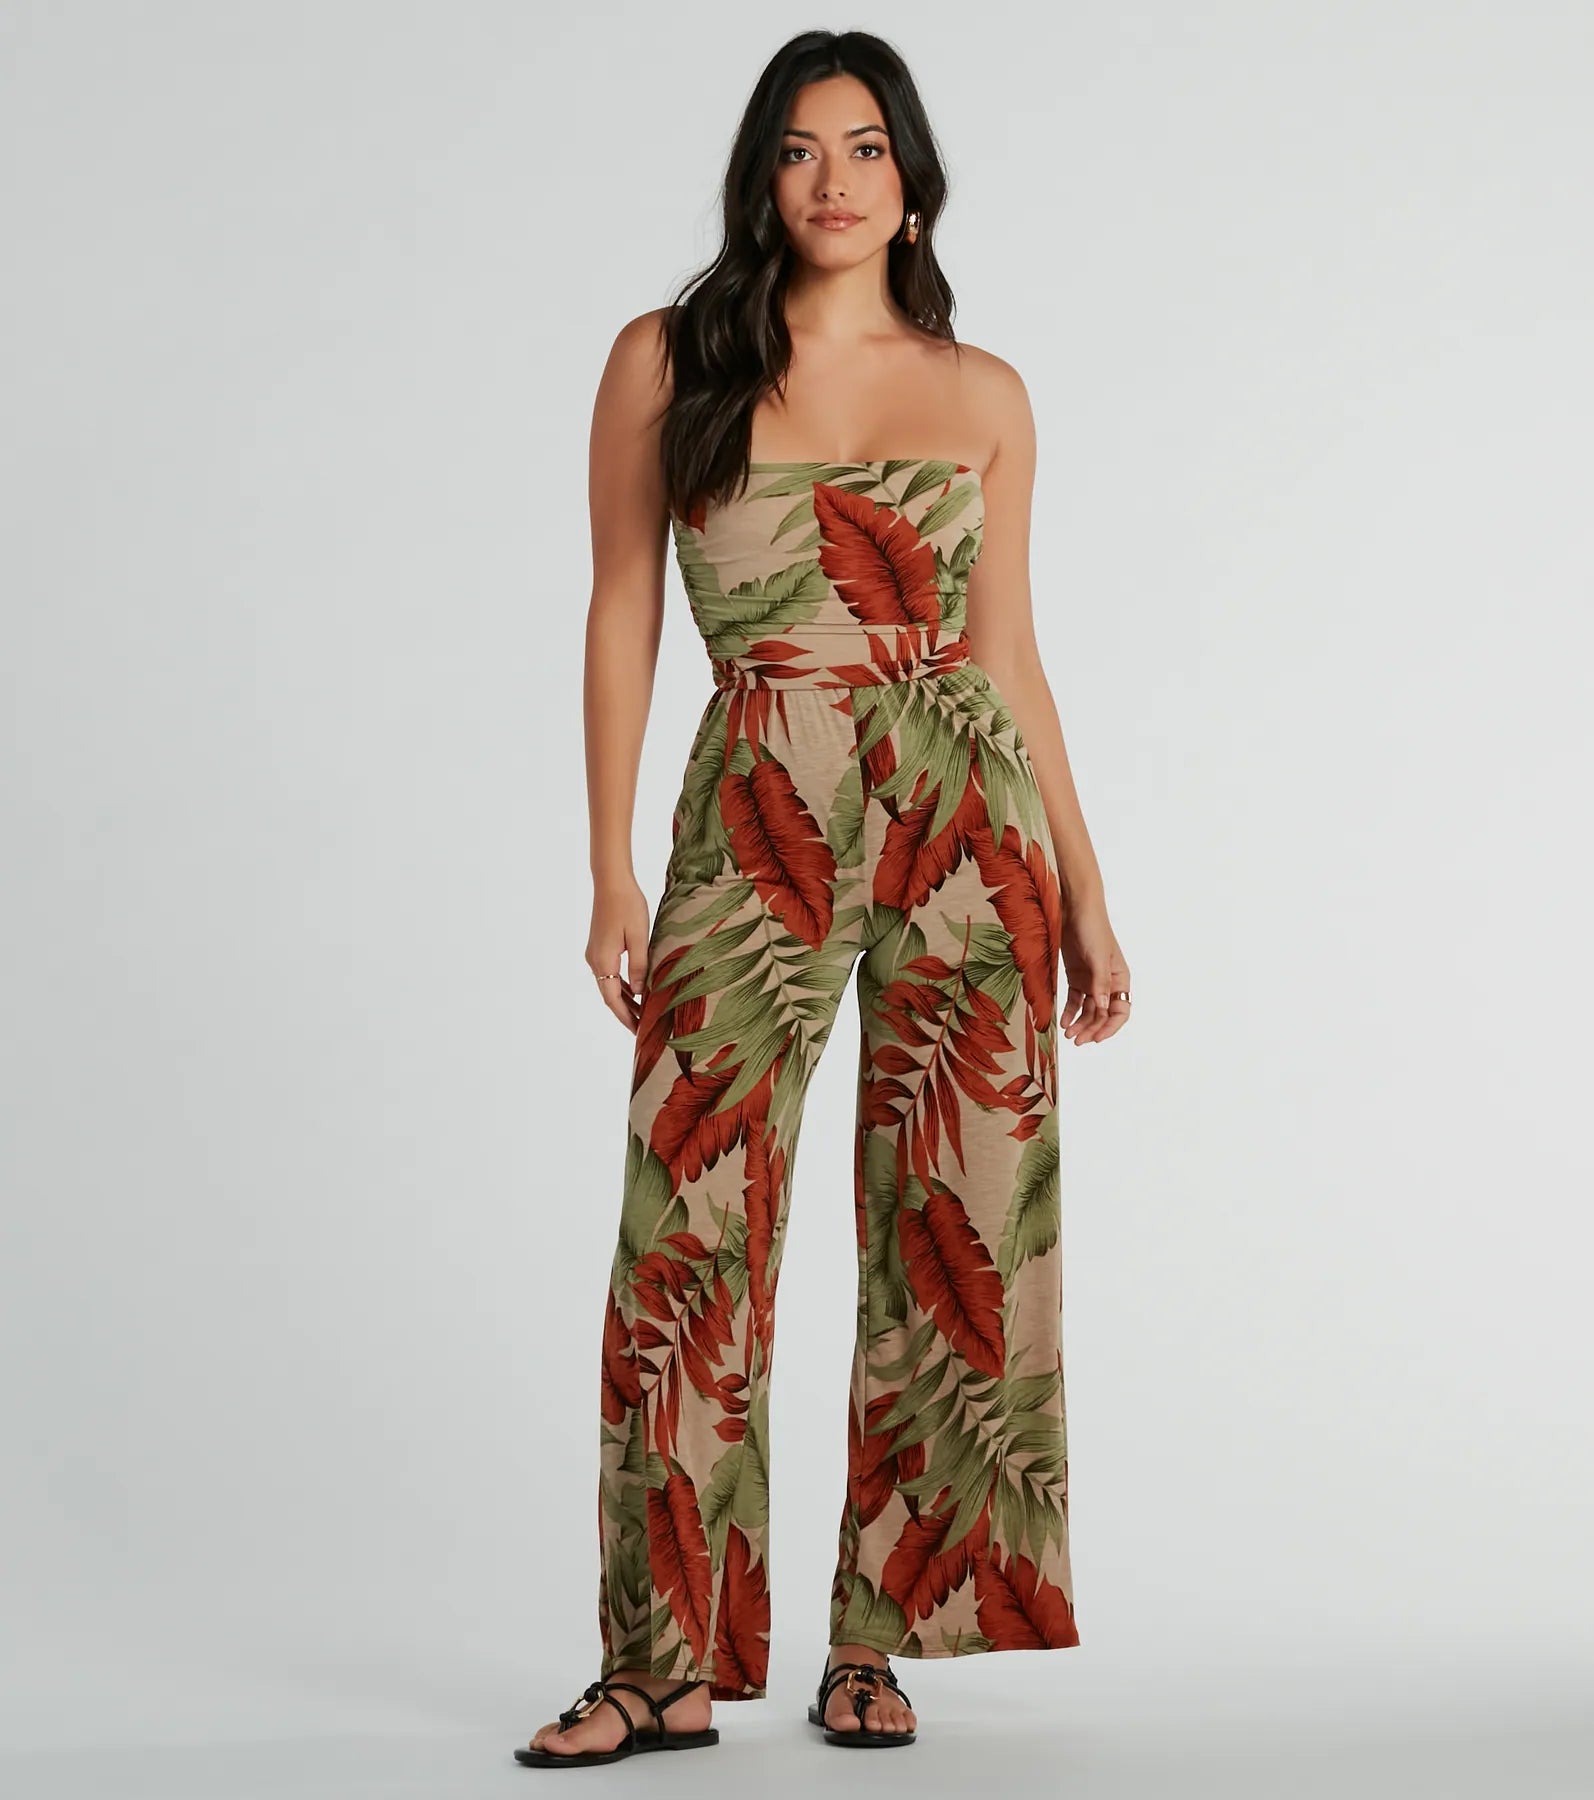 Strapless Straight Neck Fitted Stretchy Knit Tropical Print Beach Dress/Jumpsuit